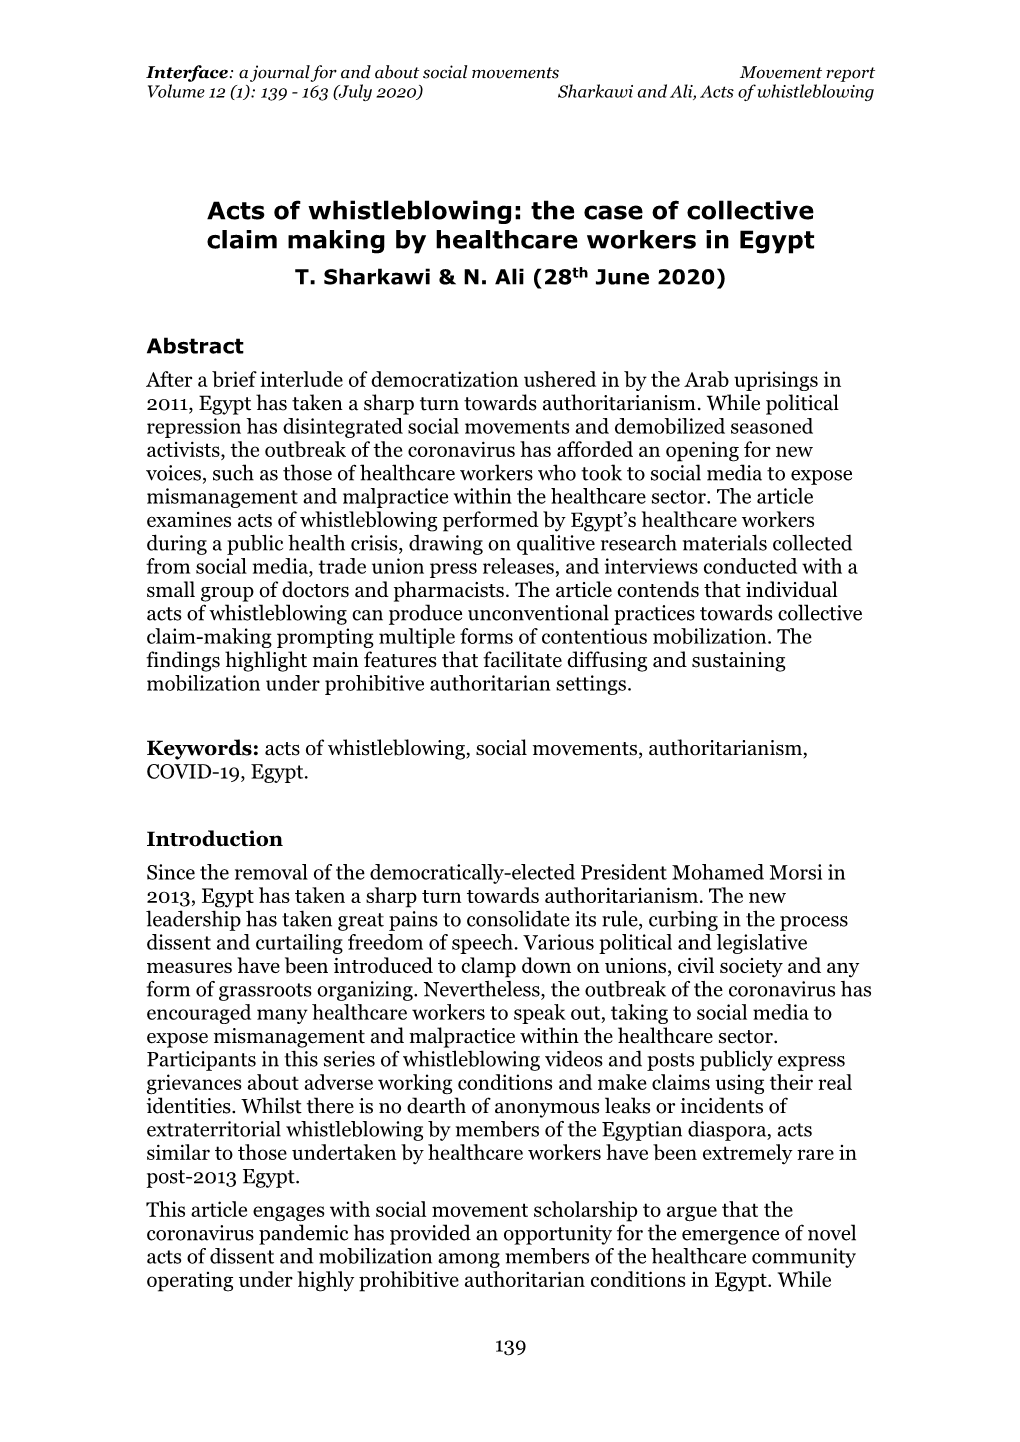 Acts of Whistleblowing: the Case of Collective Claim Making by Healthcare Workers in Egypt T